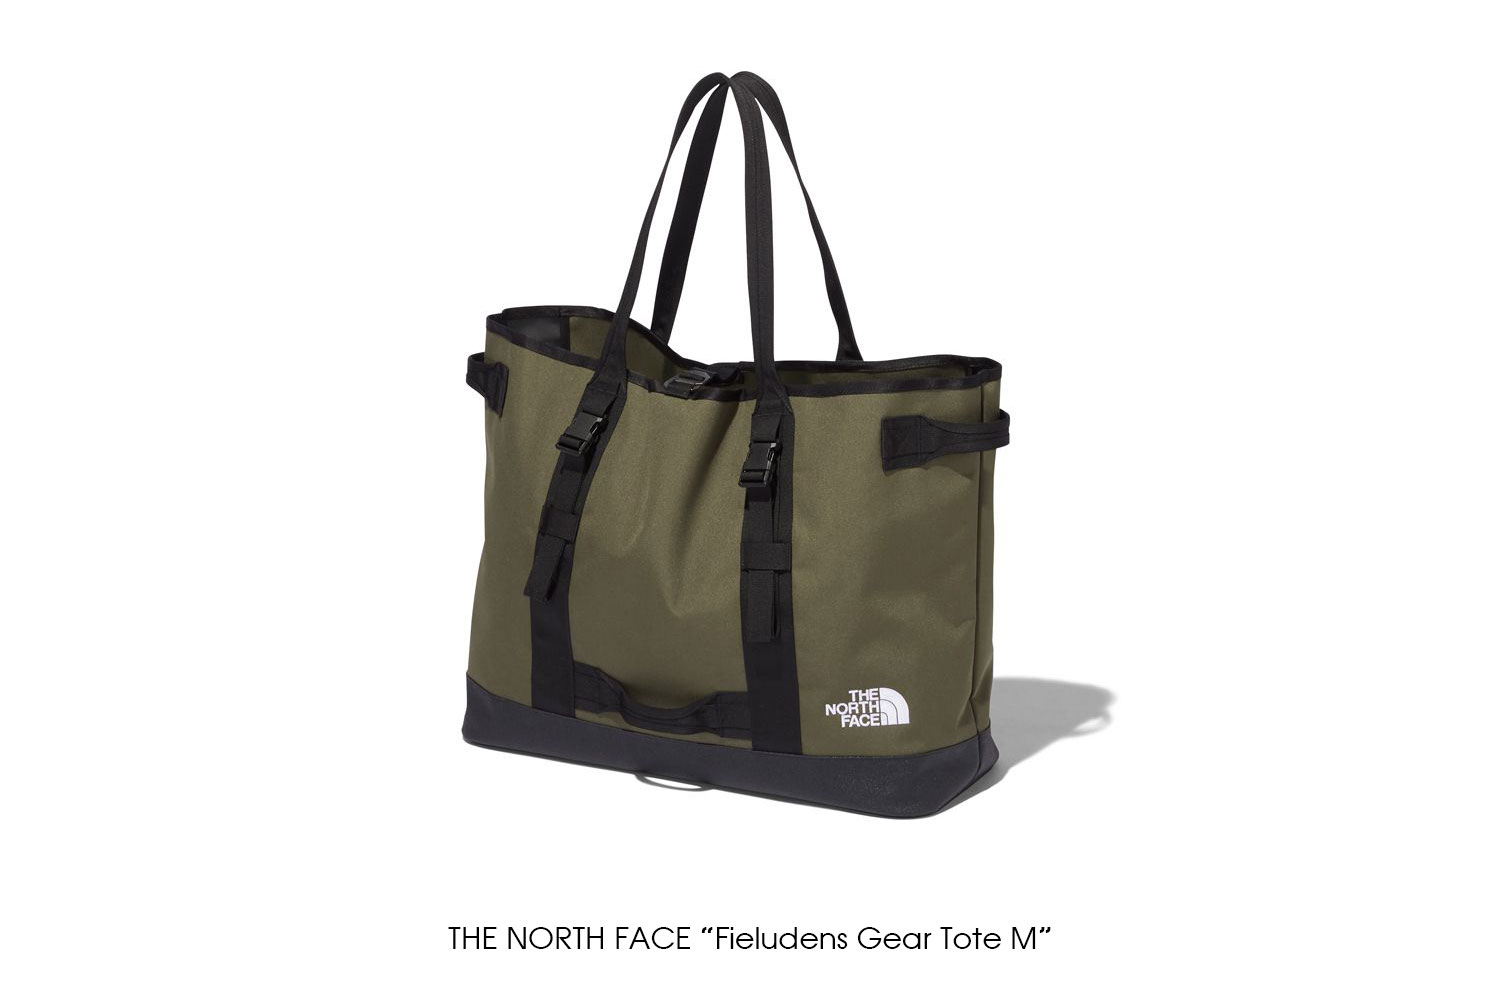 THE NORTH FACE "Fieludens Gear Tote M"